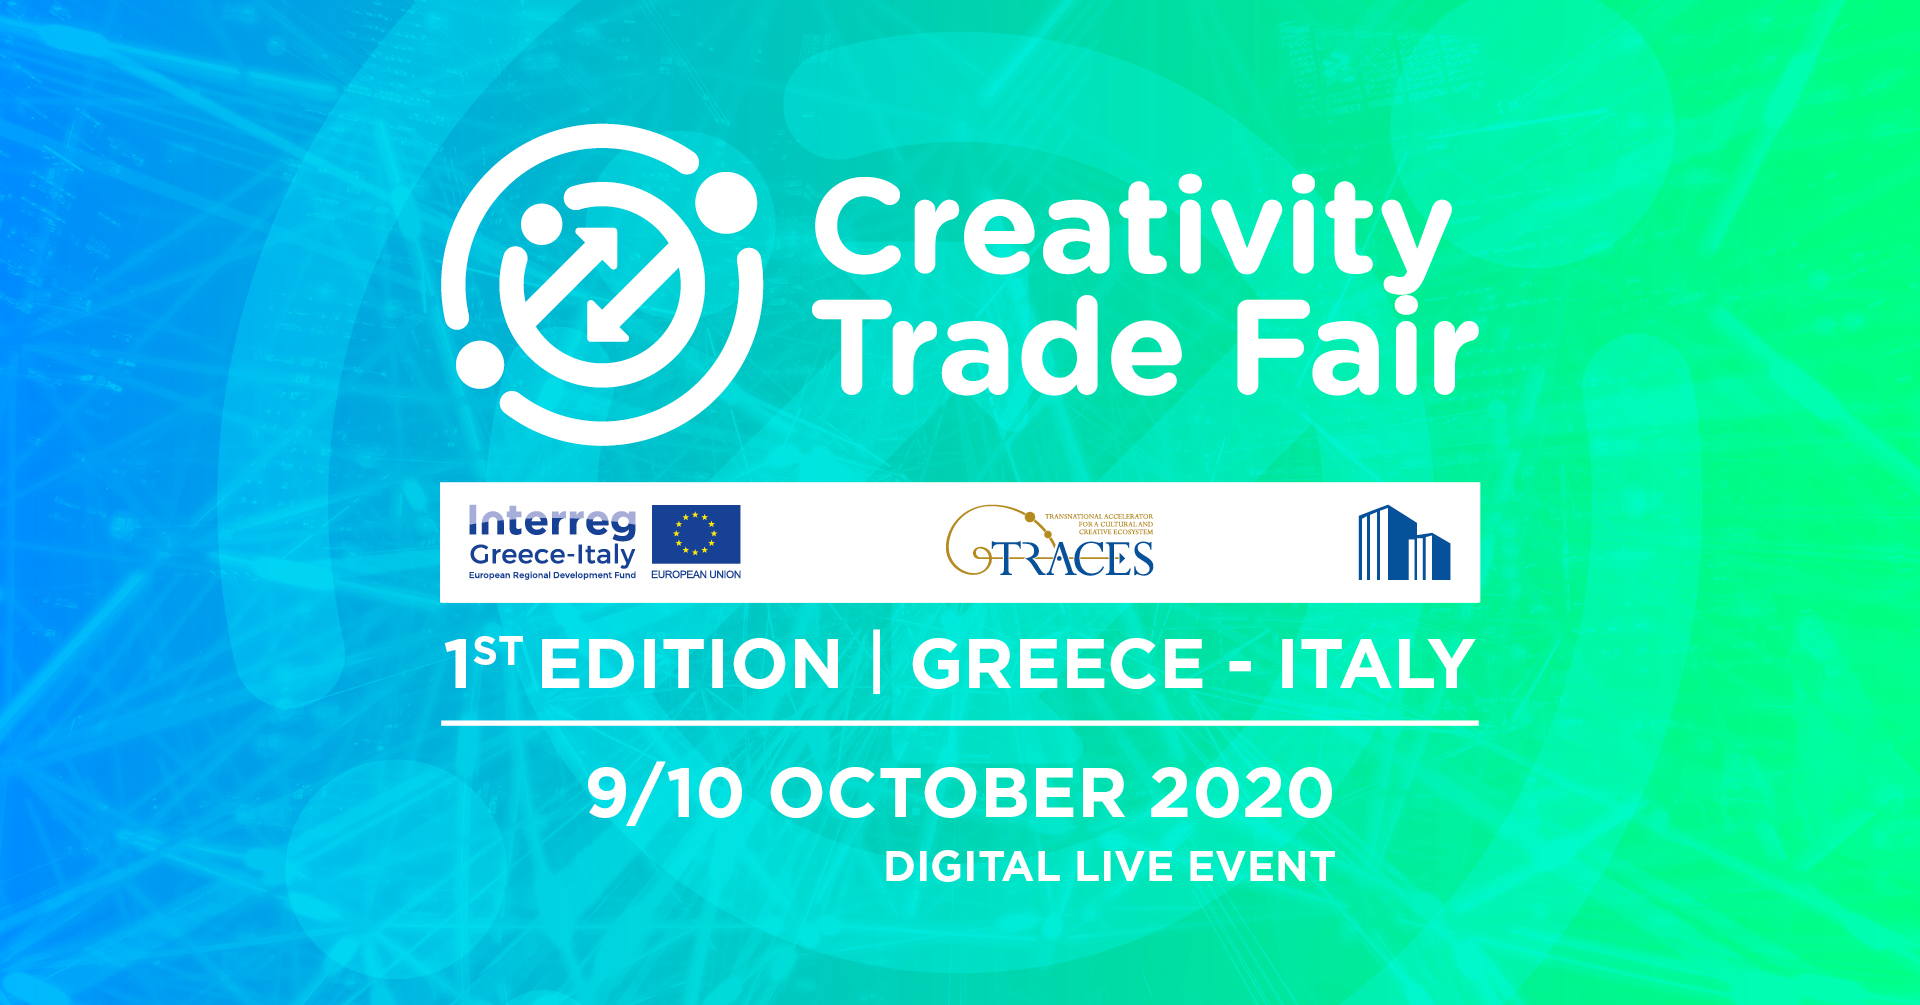 REVIEW CREATIVITY TRADE FAIR OPENING CONFERENCE AND ALL THE SCHEDULED EVENTS